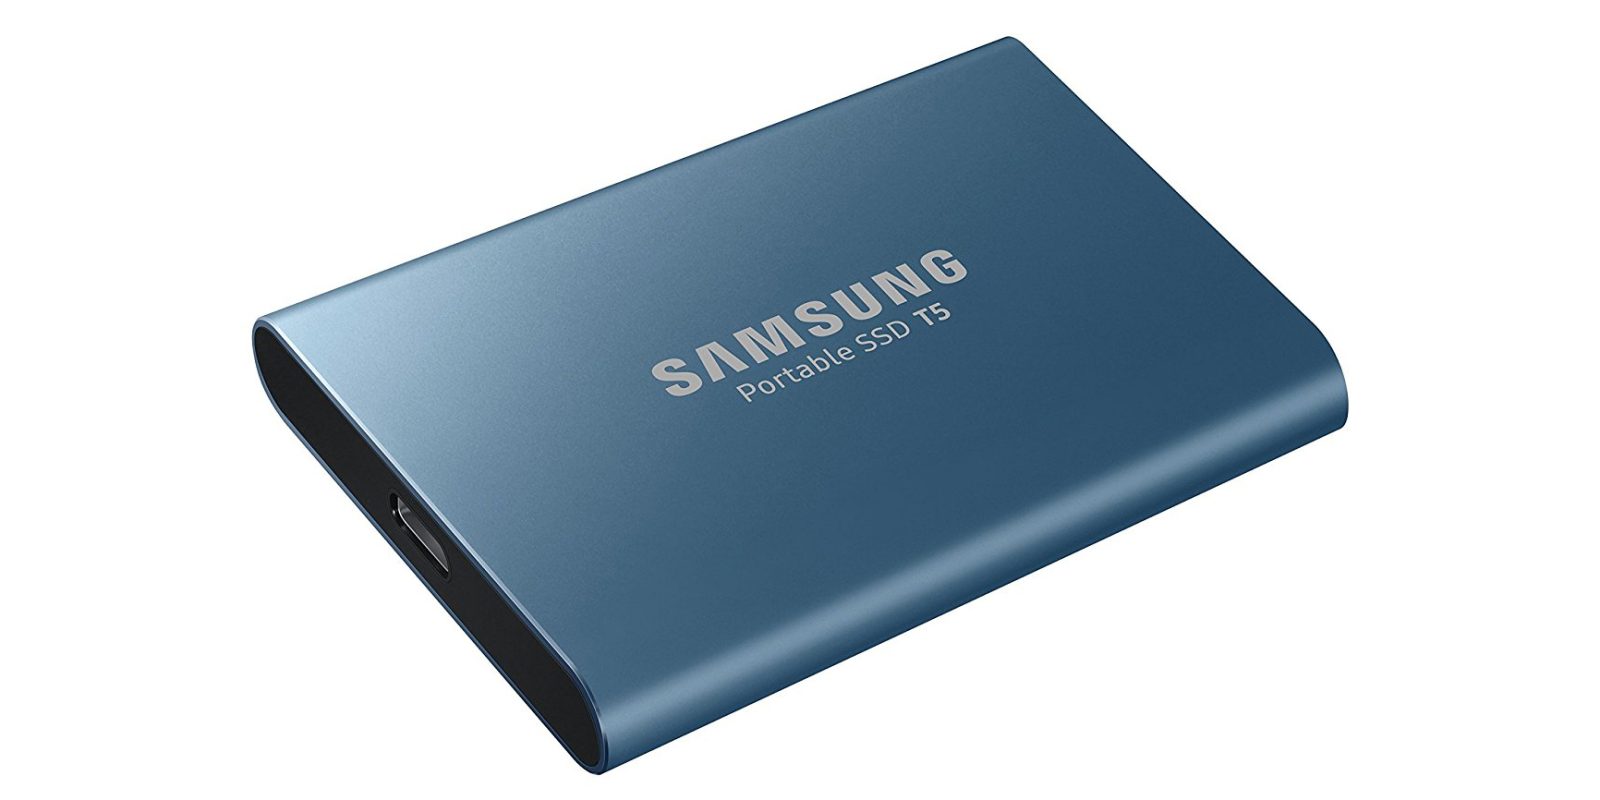 Samsung unveils new T5 USB-C portable solid-state drives, priced from $130  - 9to5Mac